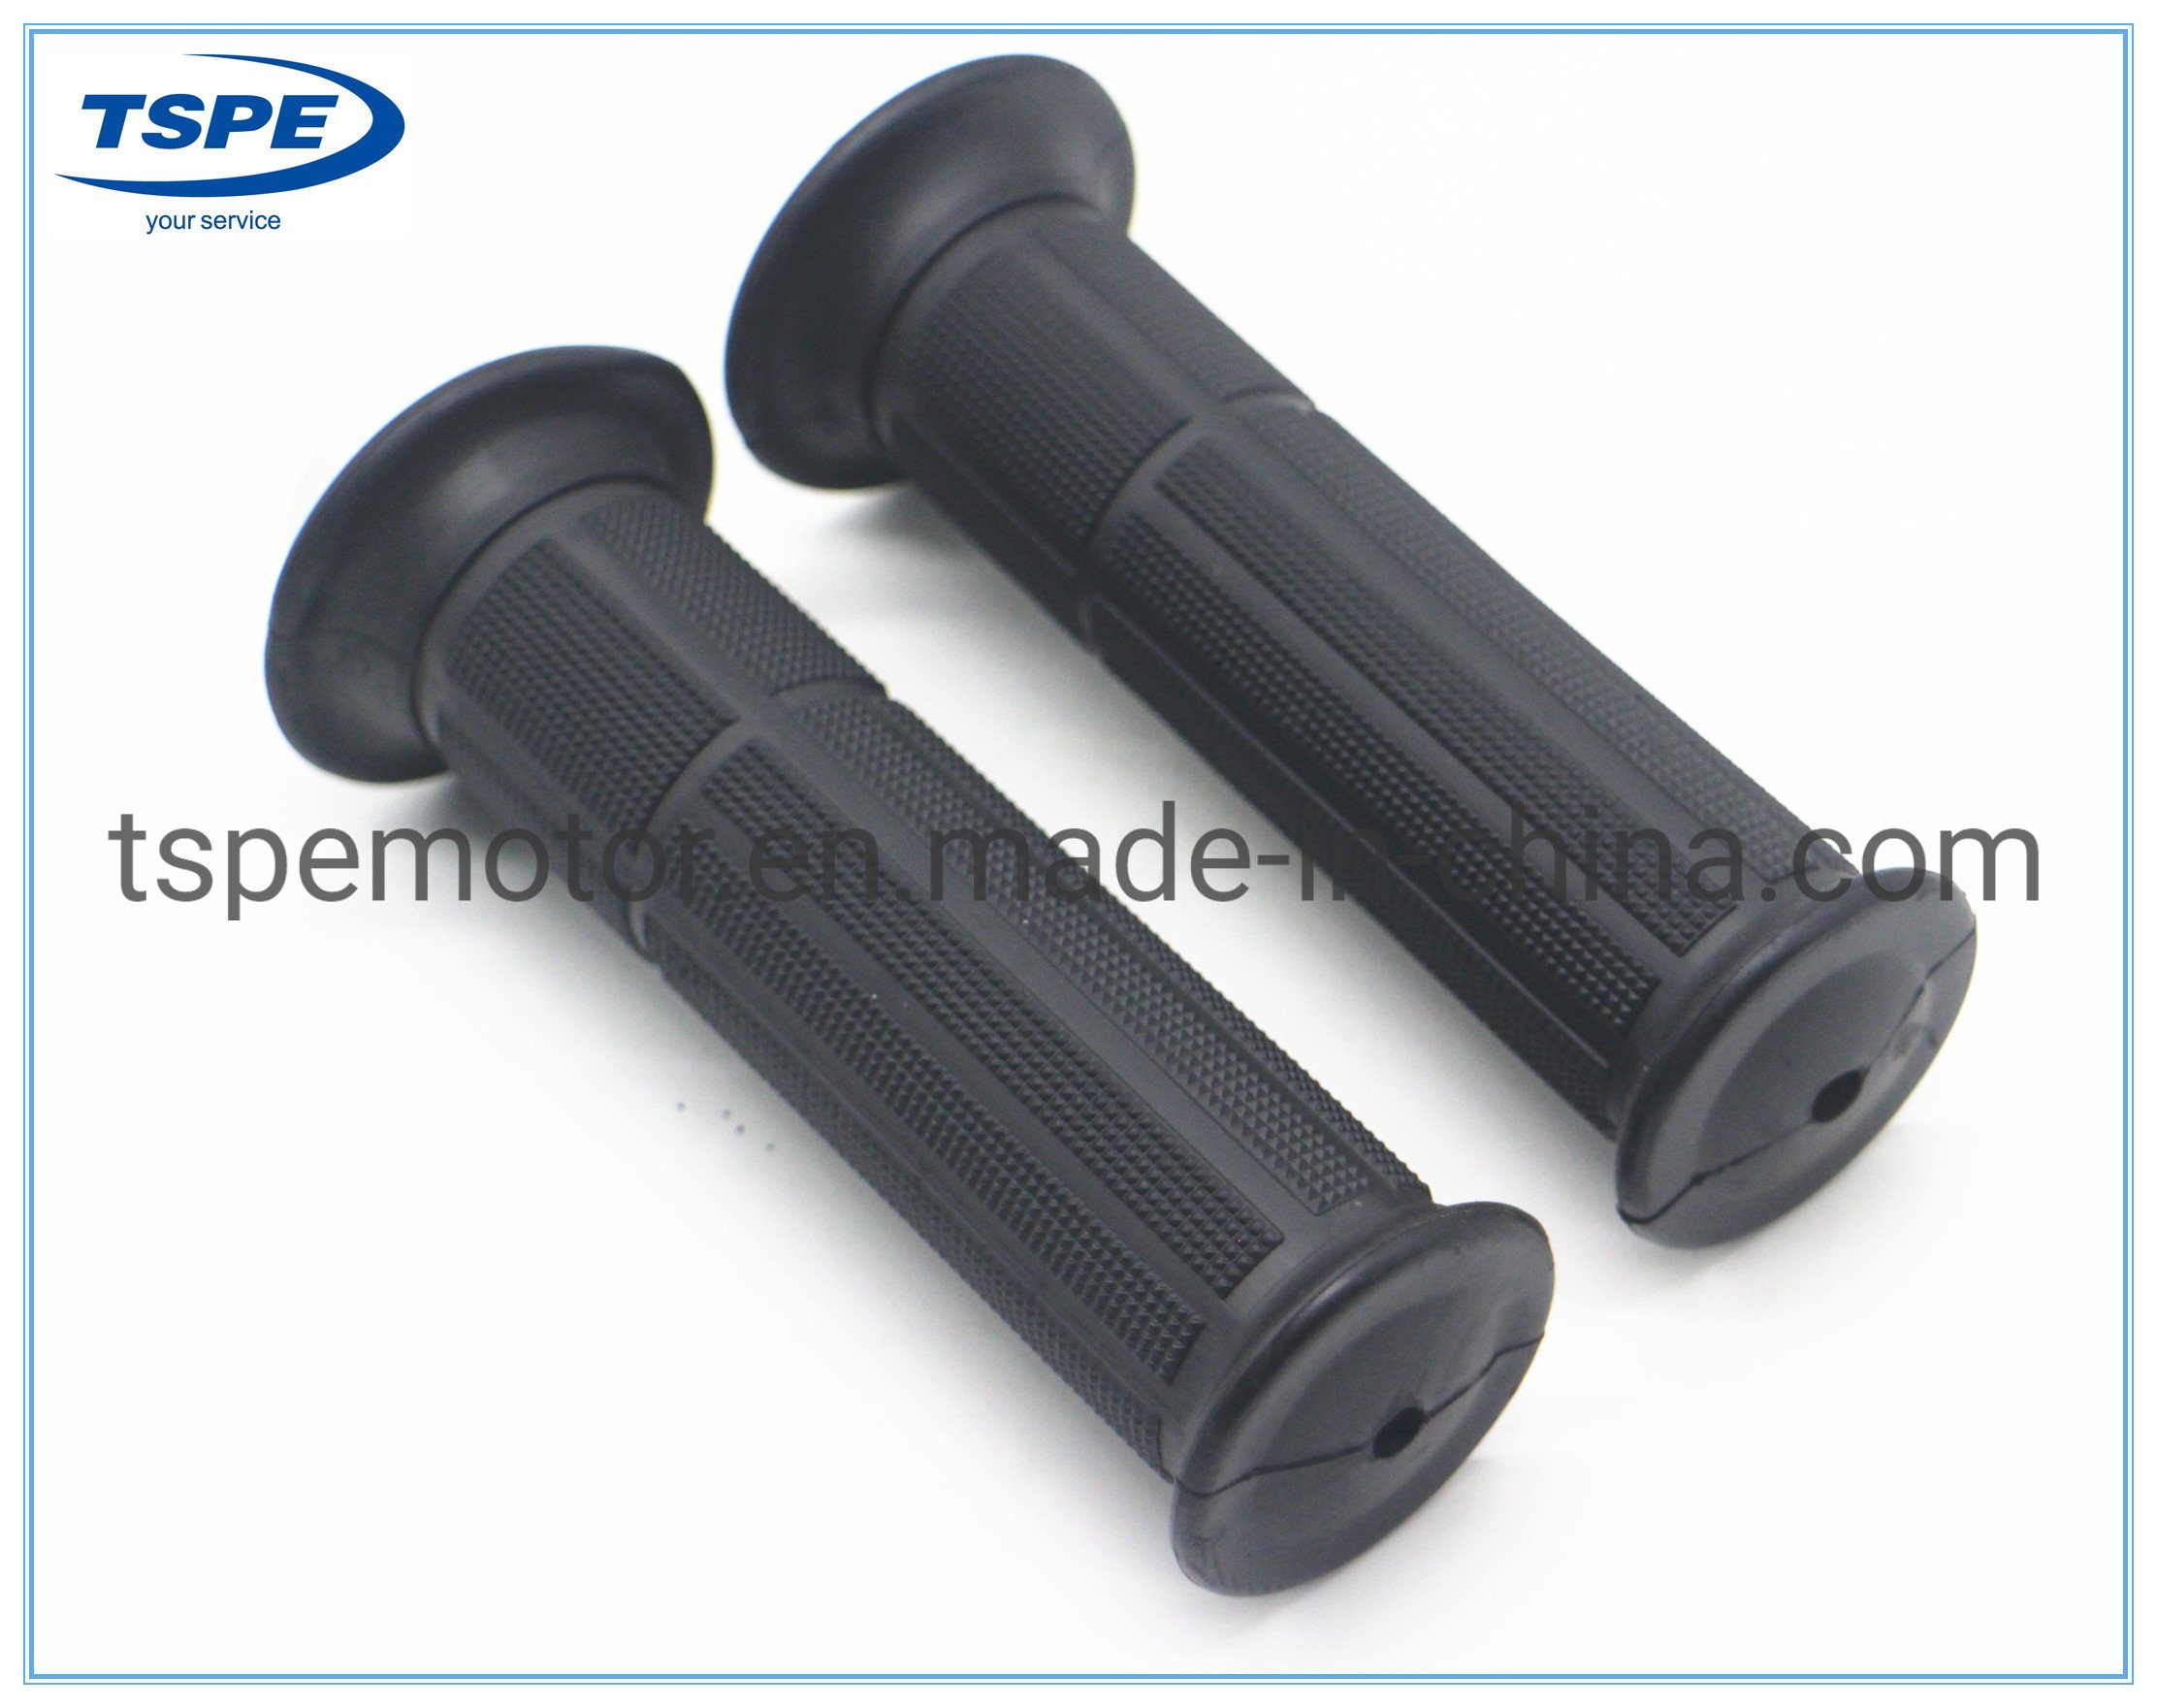 Motorcycle Parts Motorcycle Accessories Handle Grips for Dm-150 Italika